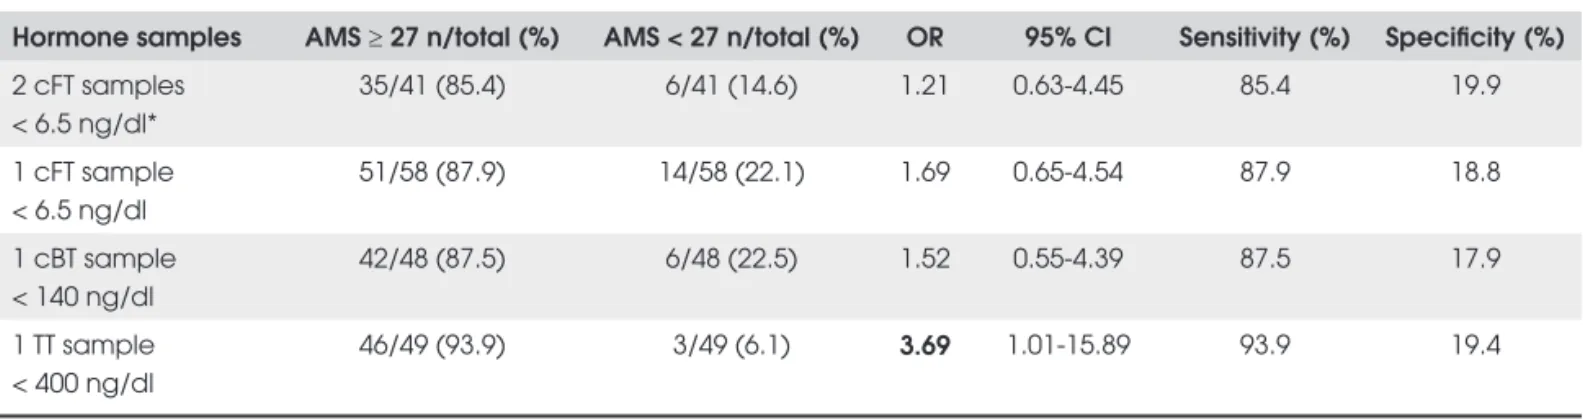 Table 1.  Comparisons of AMS score ≥ 27 with measurements of calculated free, bioavailable and total testosterone.